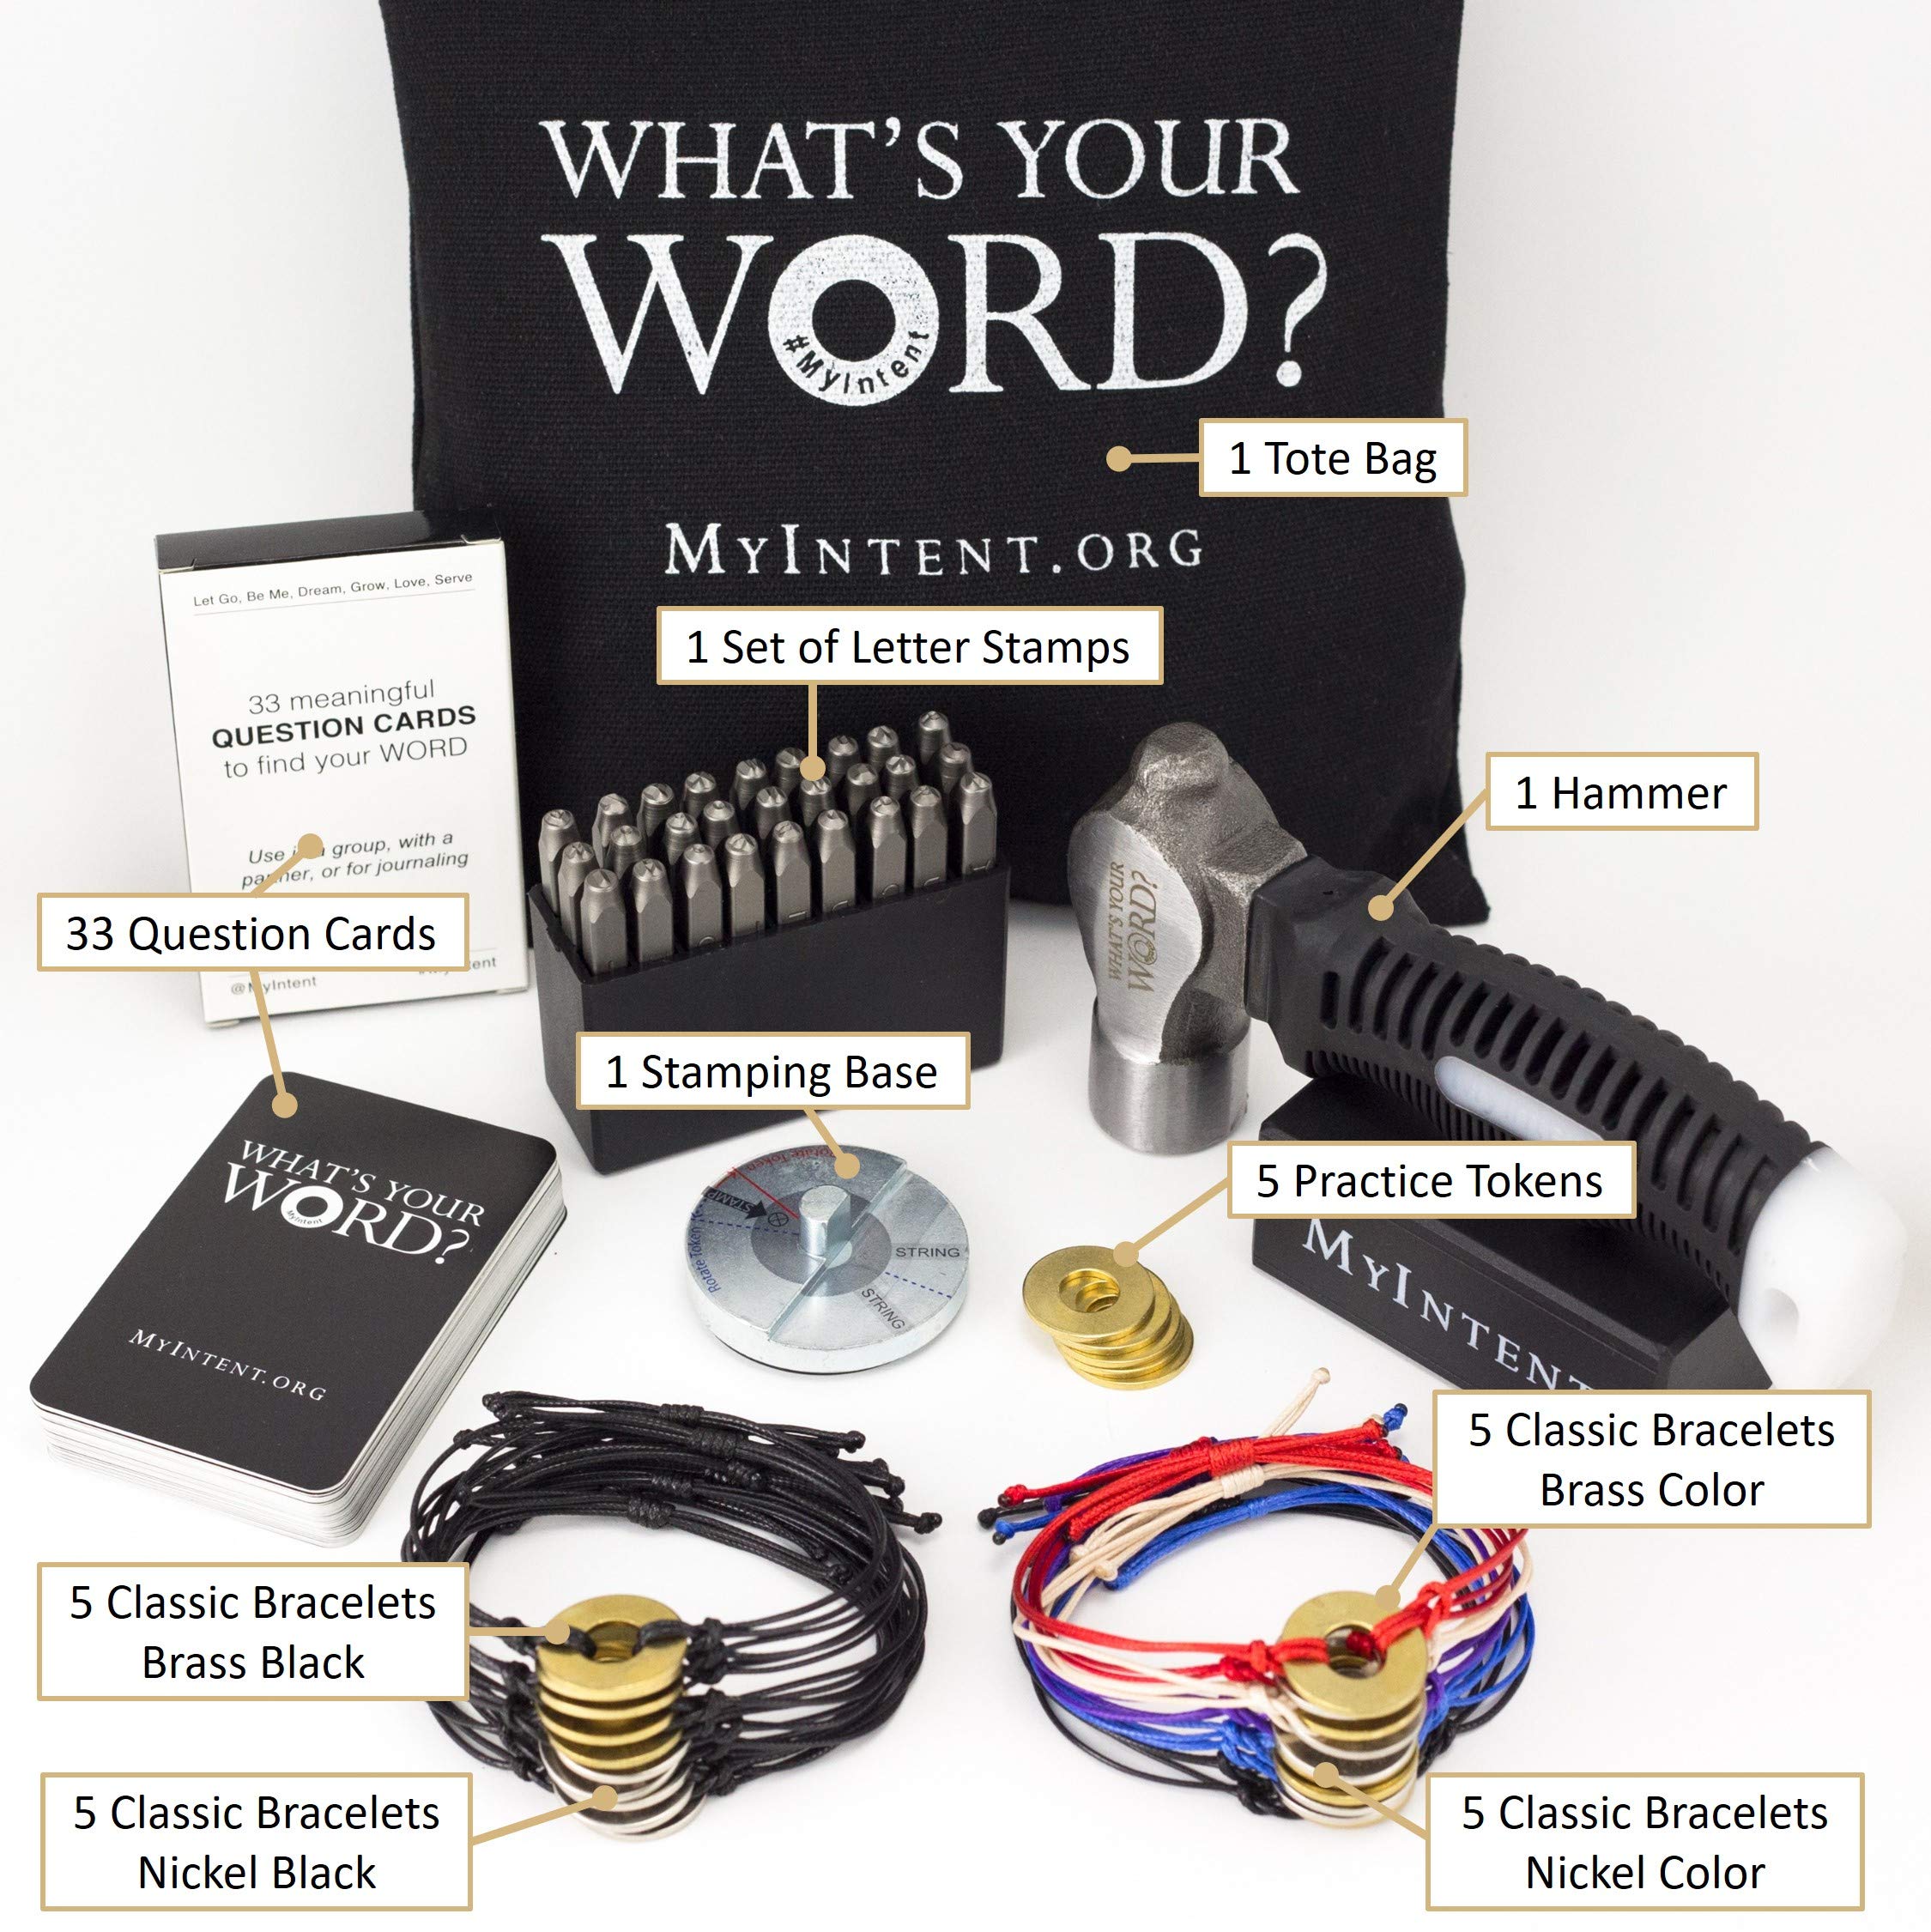 MyIntent Classic 20 Mix Maker Kit: Jewelry Making Supplies, Unique Charms, What's Your Word Conversation Cards, Makes 20 Bracelets